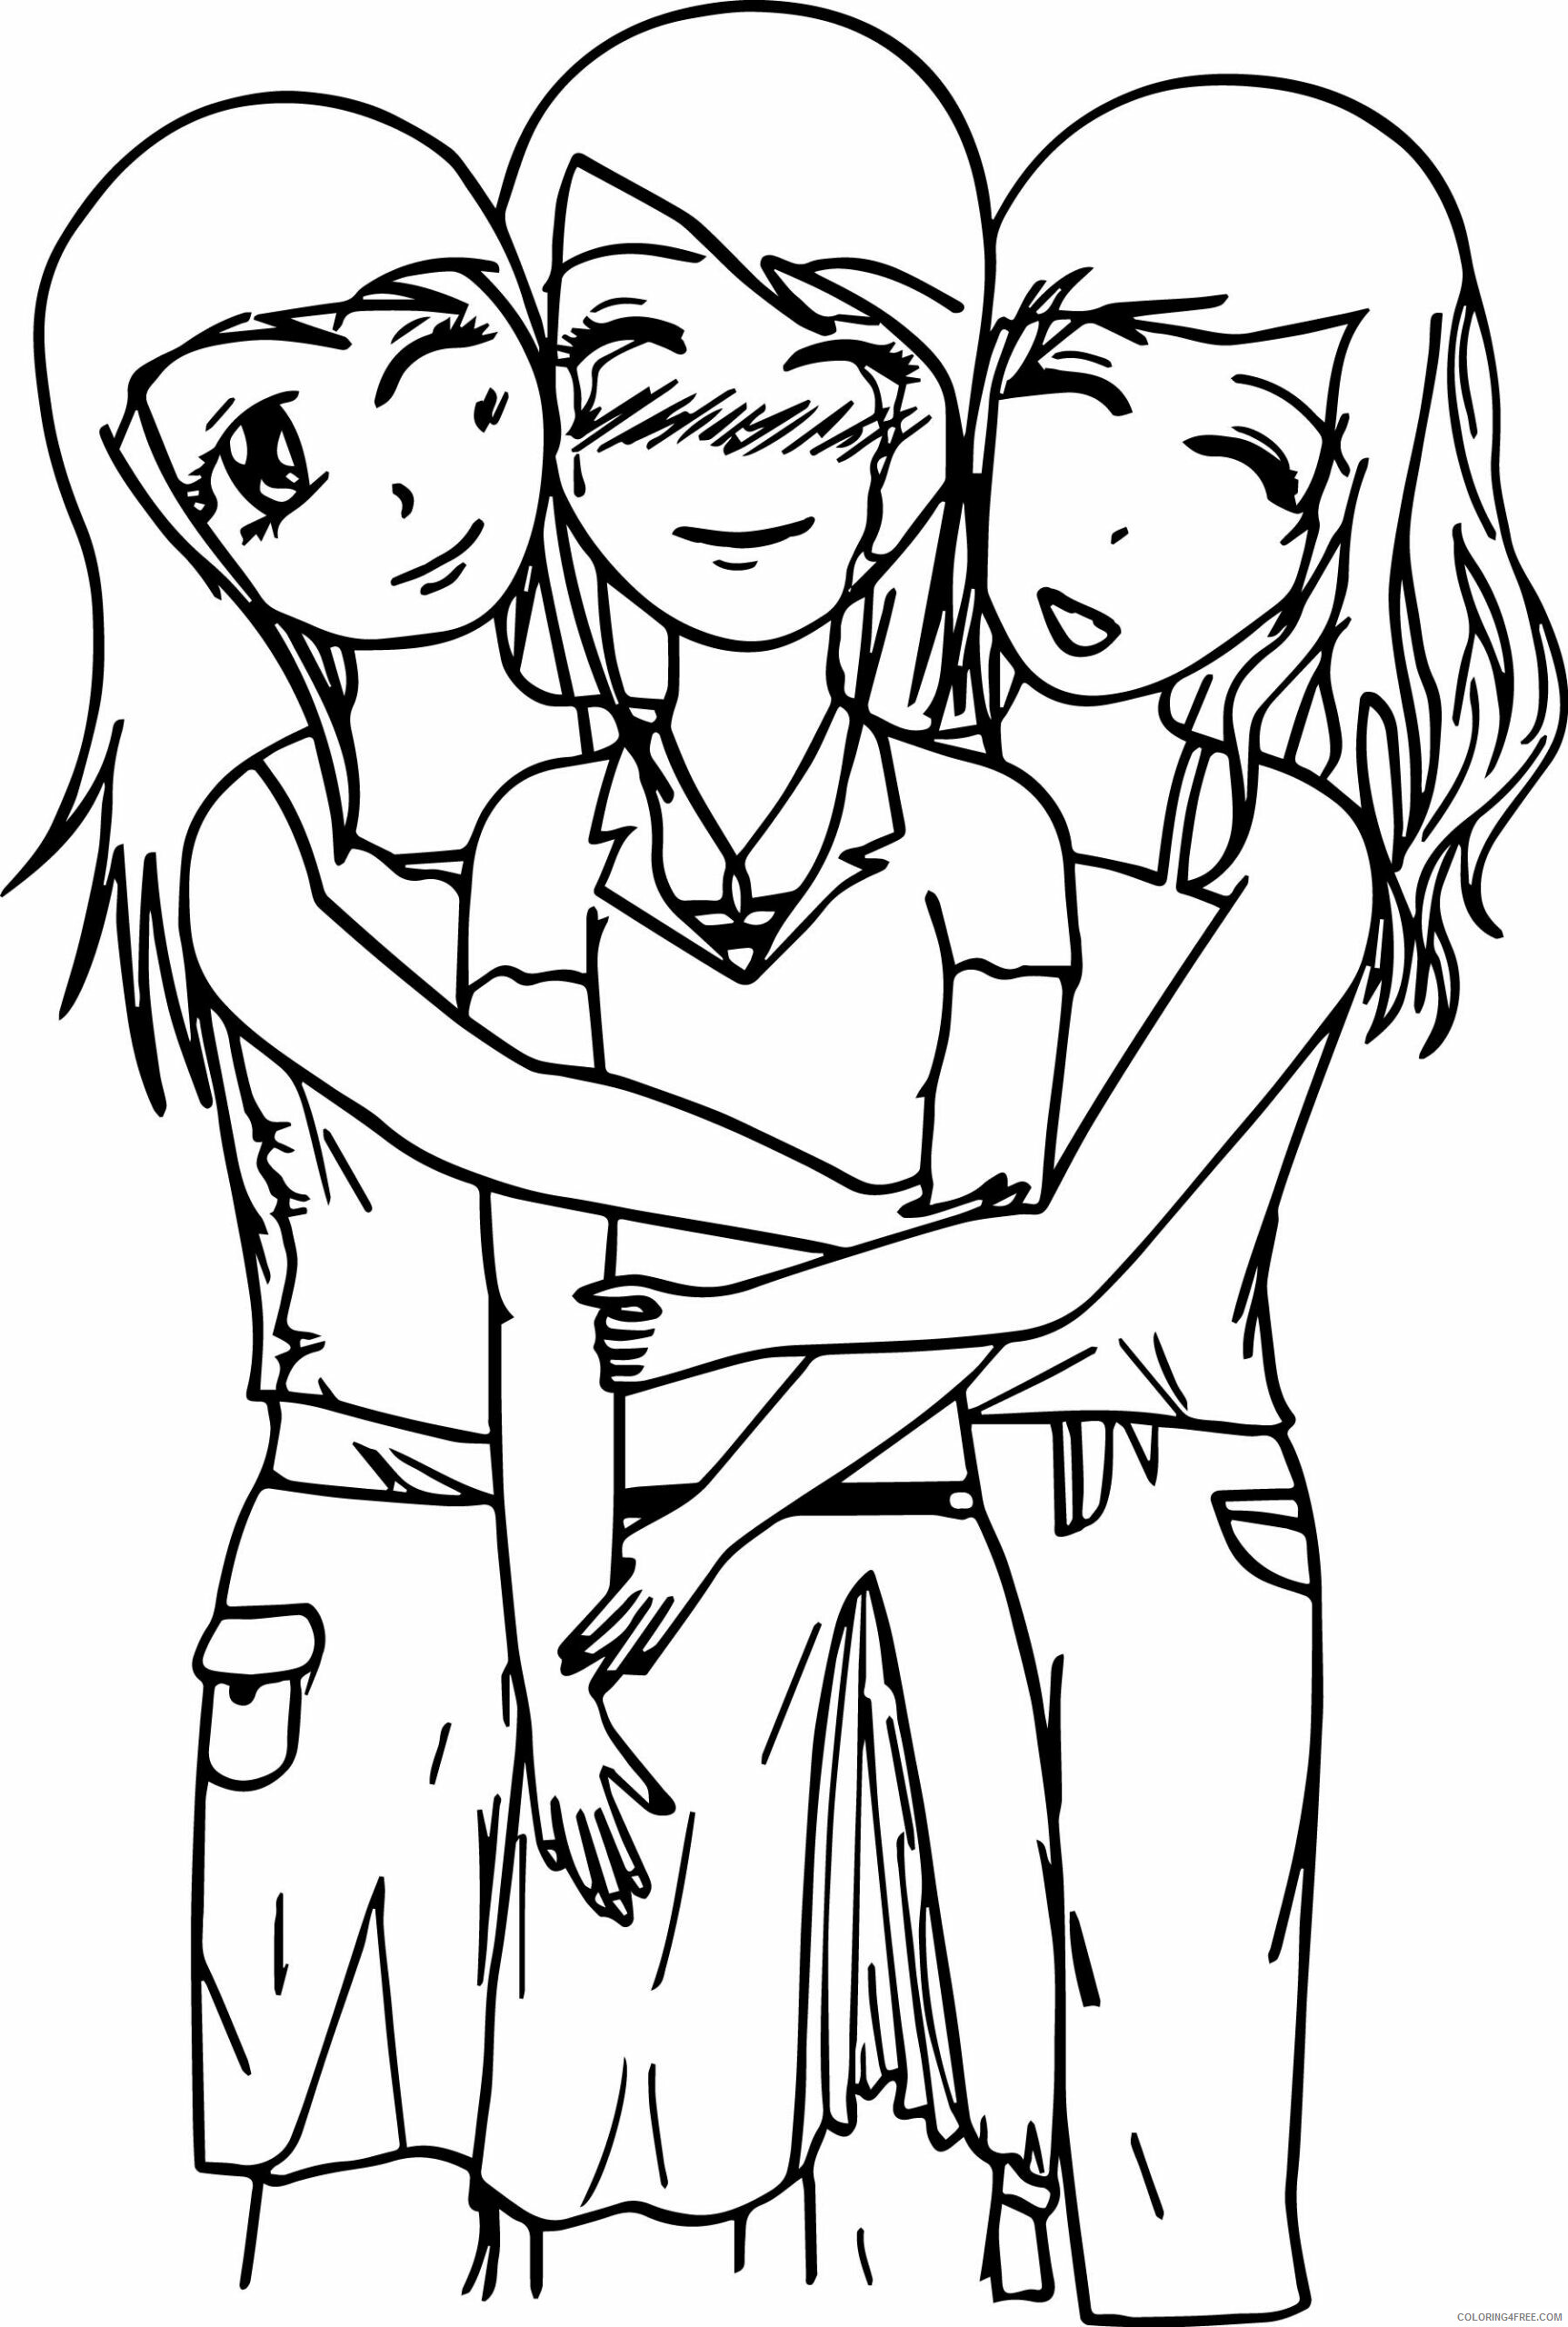 Best Friend Coloring Pages Three Best Friends Printable 2021 0899 Coloring4free